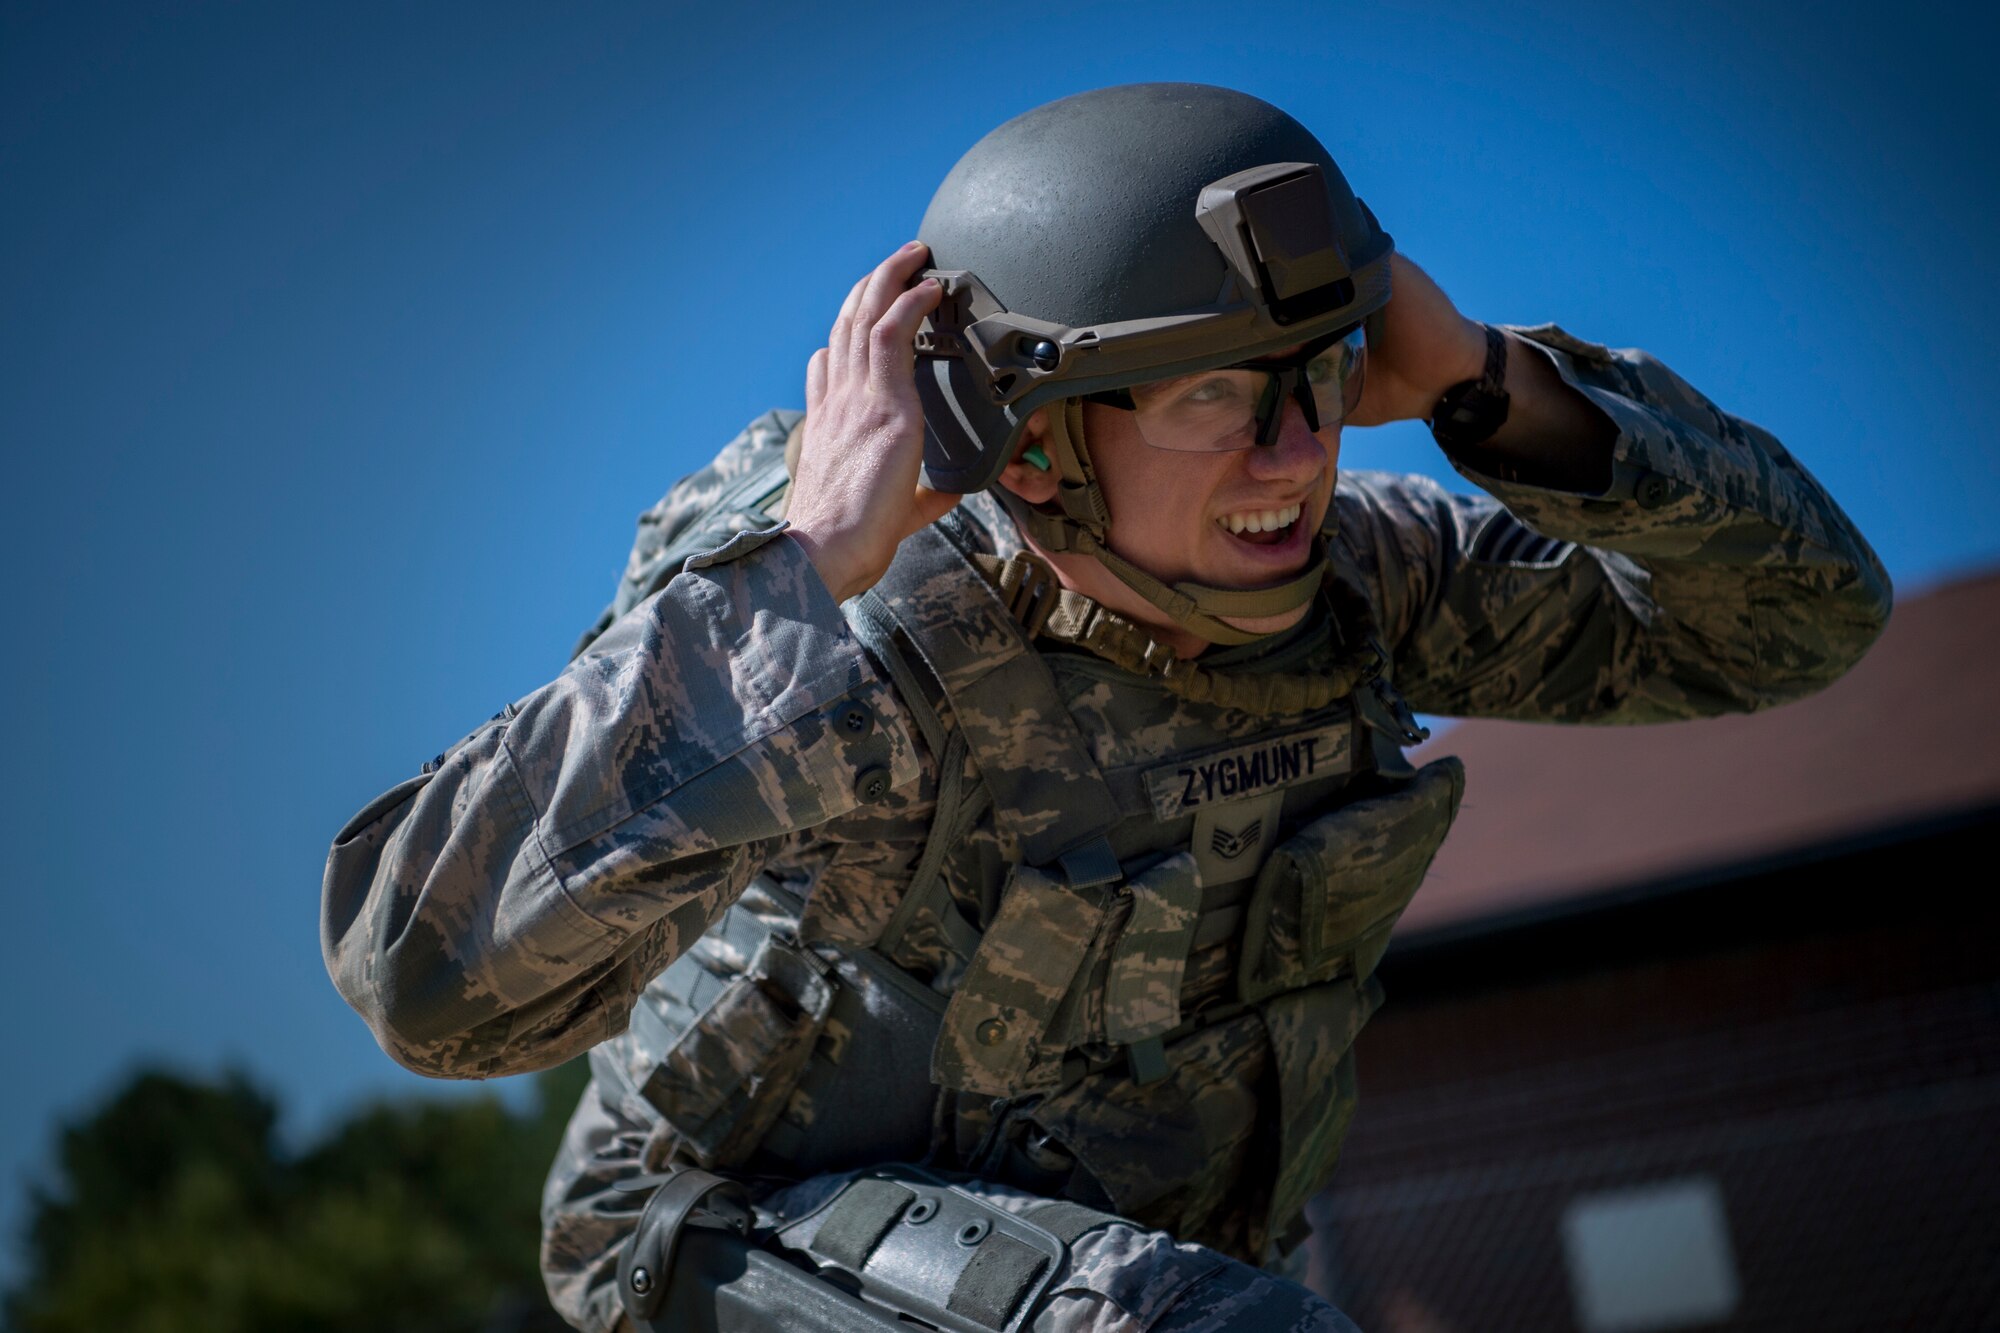 U.S. Air Force Staff Sgt. Anthony Zygmunt, 7th Reconnaissance Squadron alarm monitor, performs physical exercises prior to firing during Air Combat Command’s Defender Challenge team selection at Joint Base Langley-Eustis, Virginia, Aug. 24, 2018.